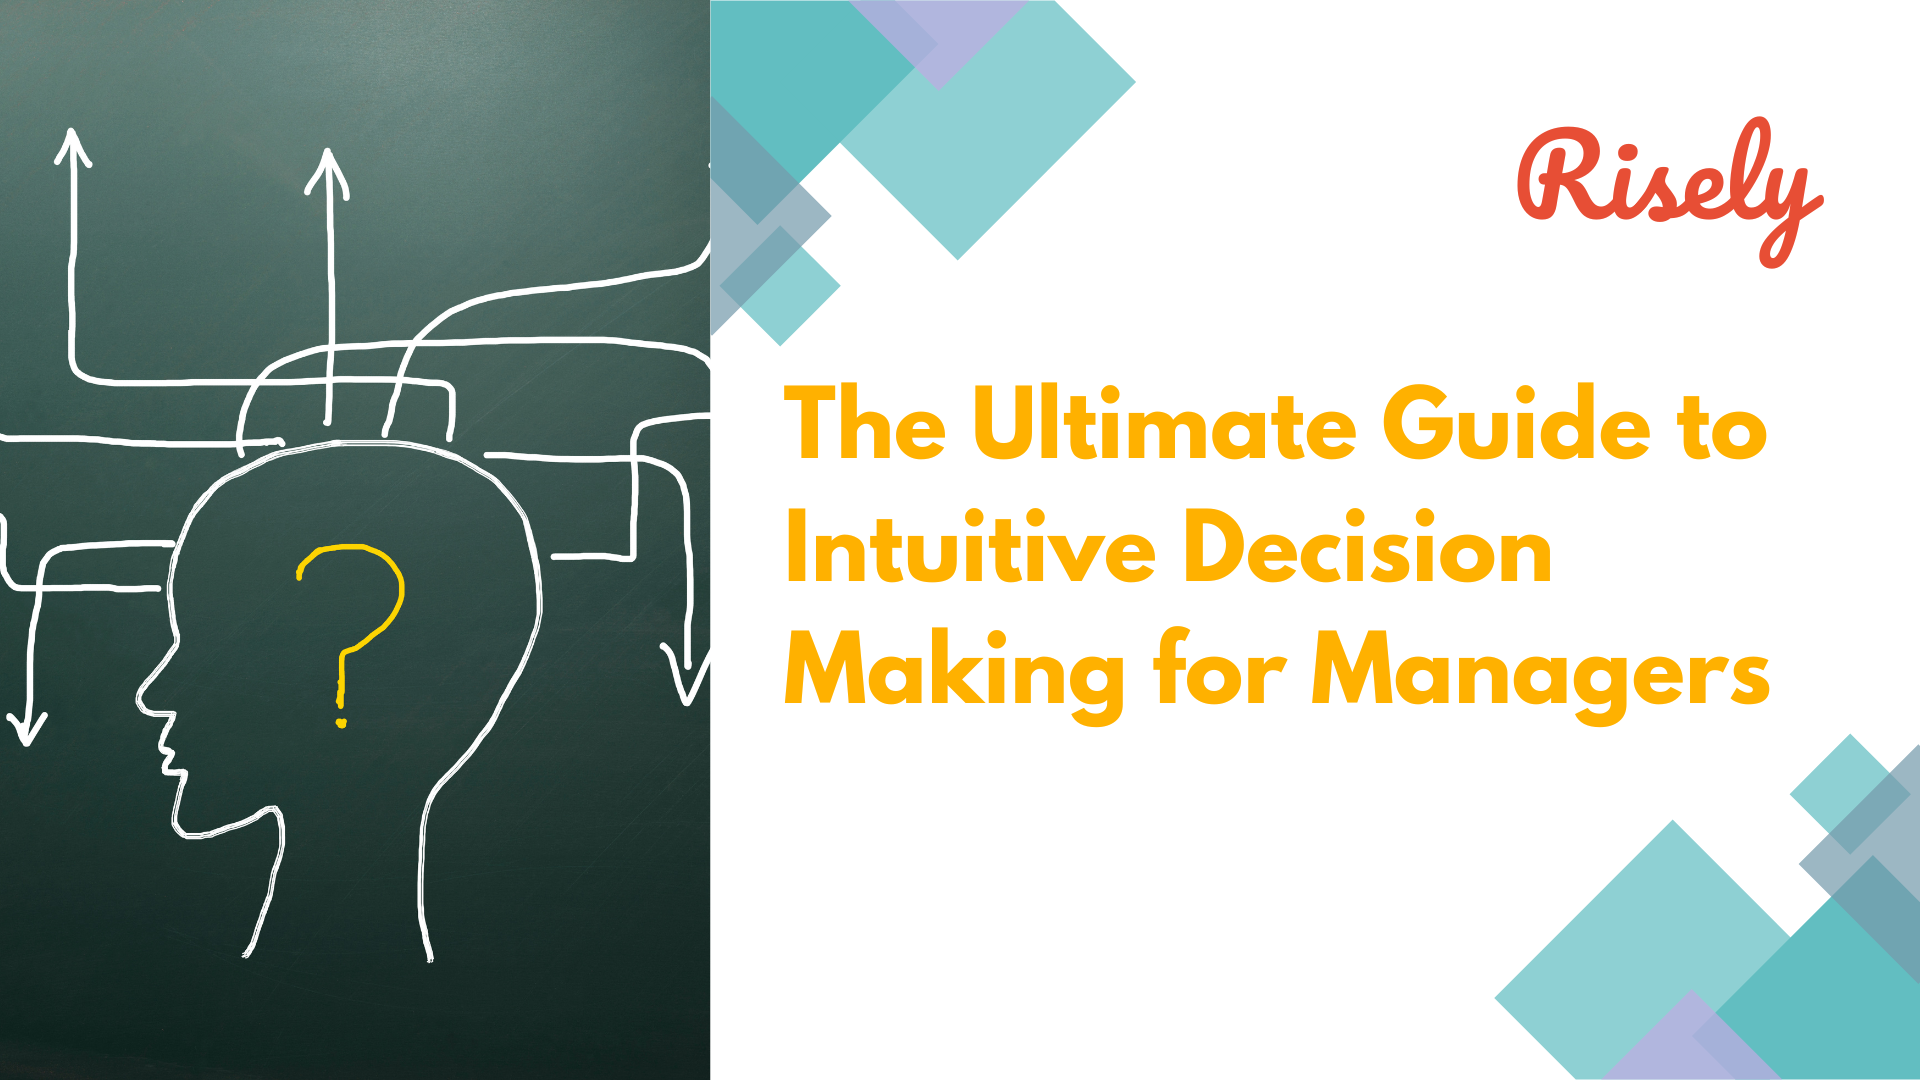 The Ultimate Guide to Intuitive Decision Making for Managers